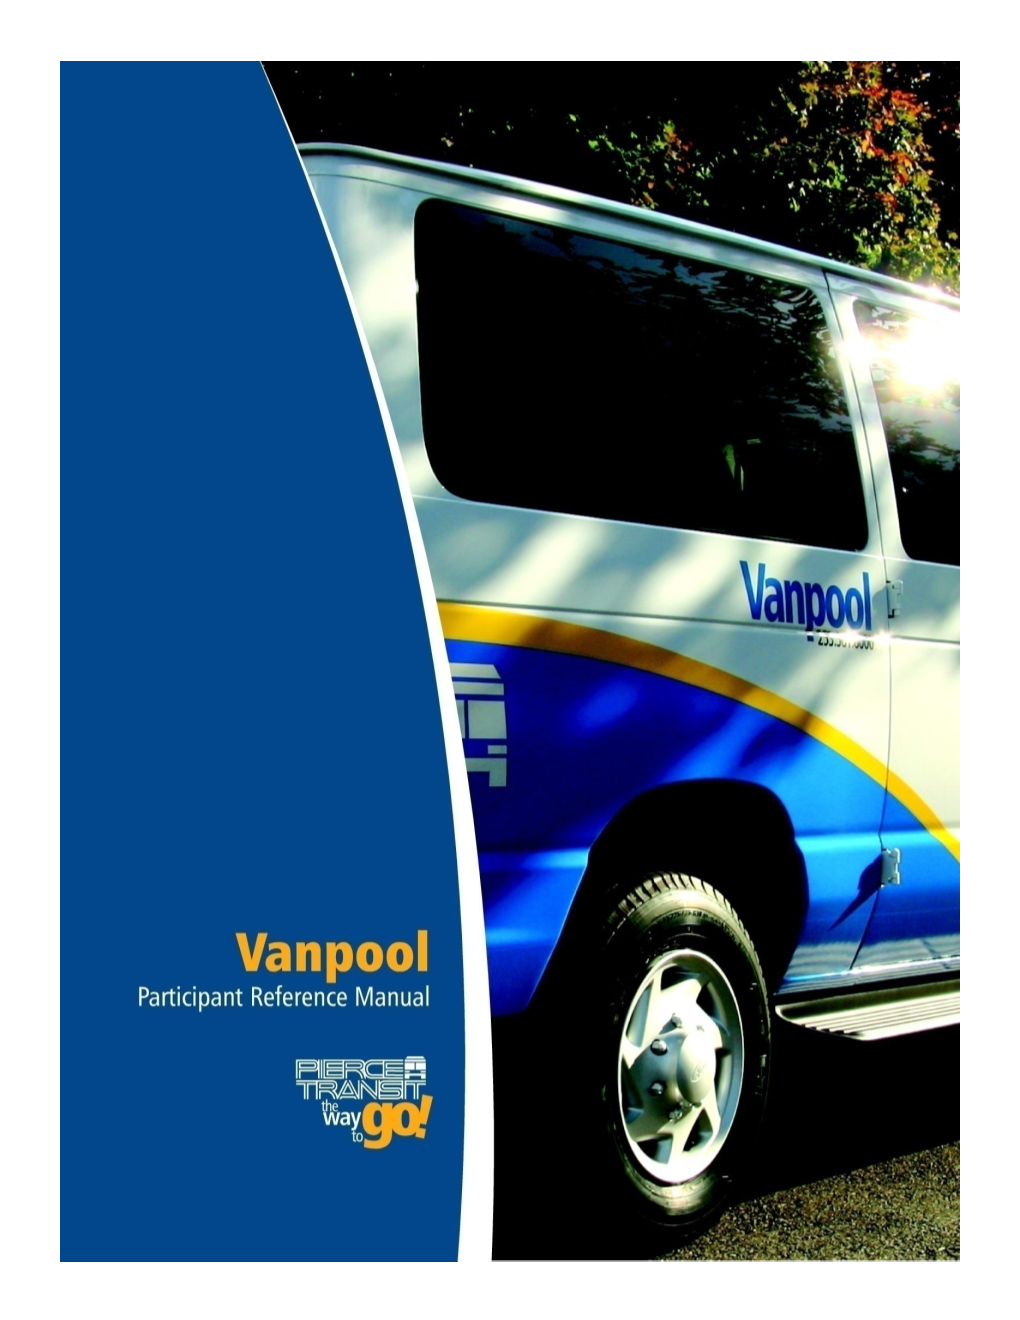 Vanpool Manual As Needed When Answering Questions, and Contact Your Pierce Transit Vanpool Coordinator As an Additional Resource